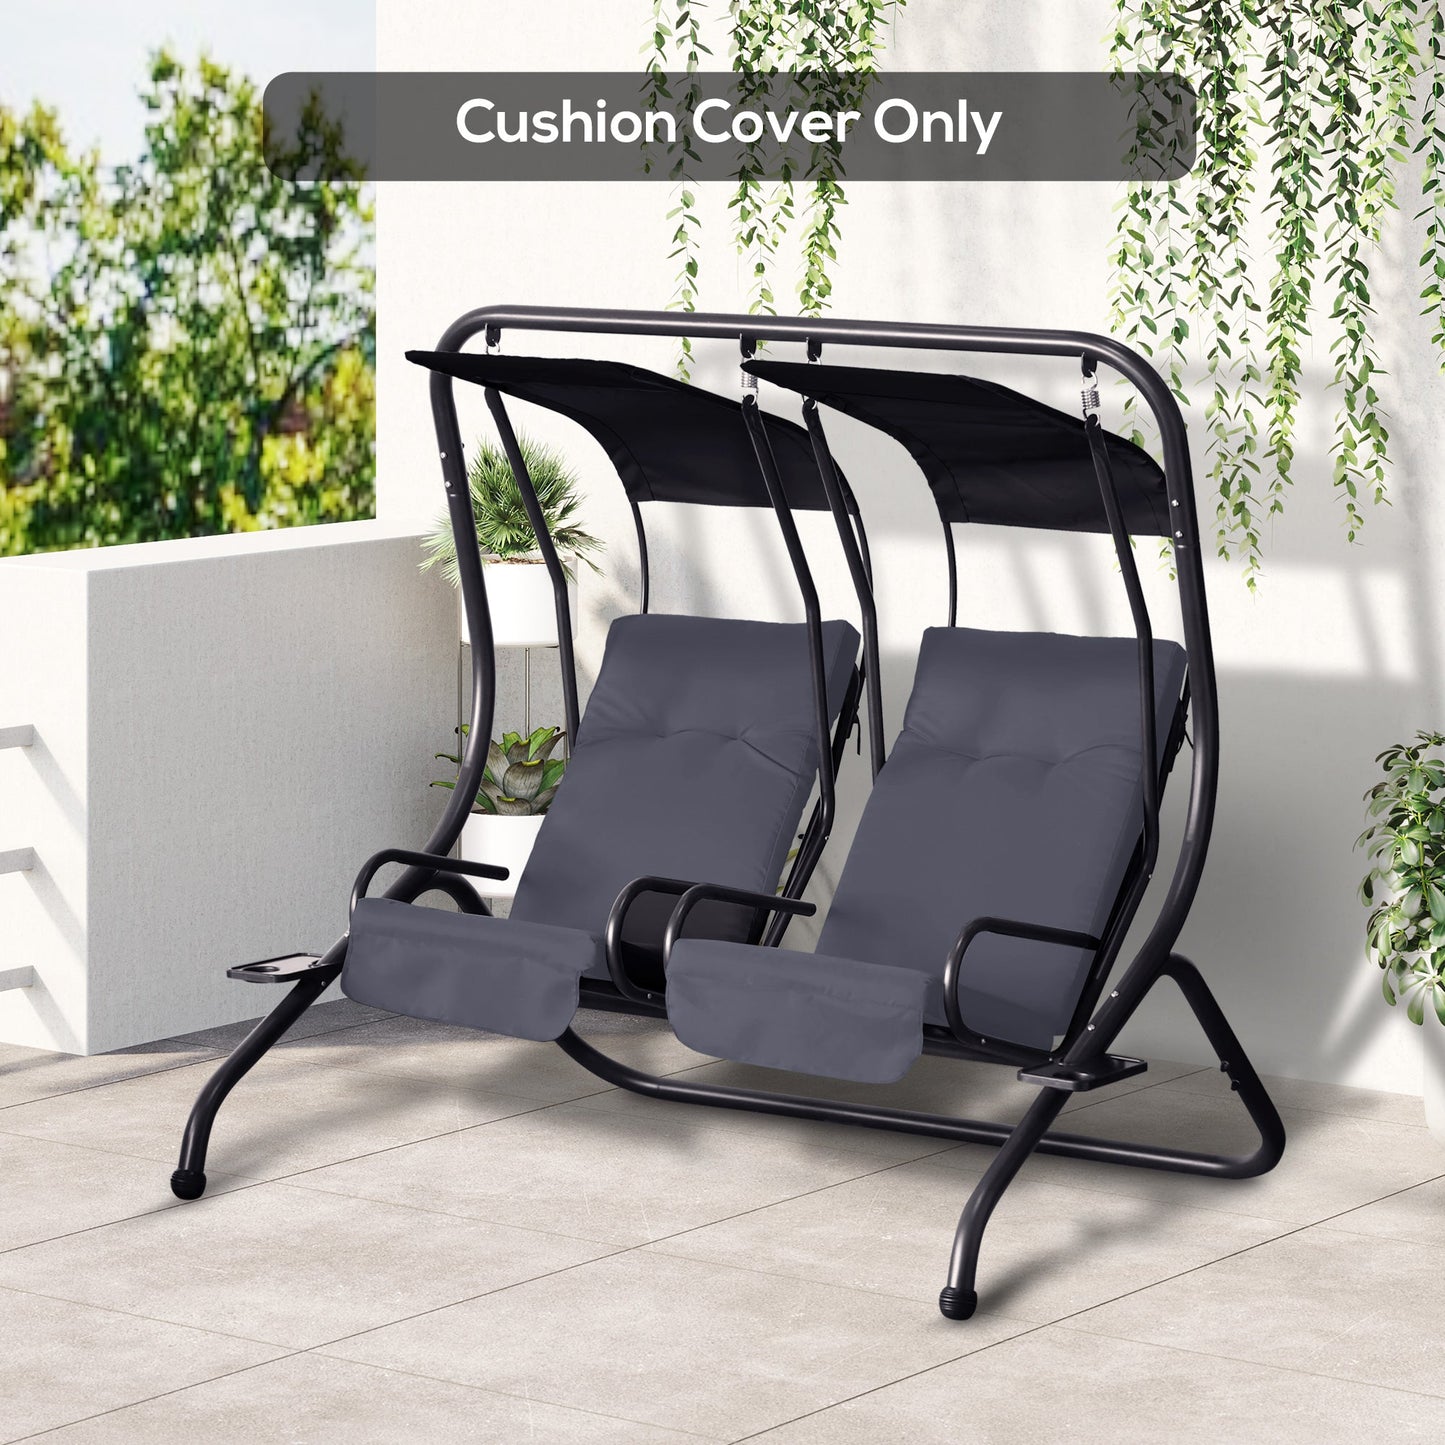 Outdoor and Garden-Porch Swing Cushions with Backrest and Ties, 48.75" x 21.75" Outdoor Swing Replacement Cushions for Patio Furniture, Set of 2, Dark Gray - Outdoor Style Company